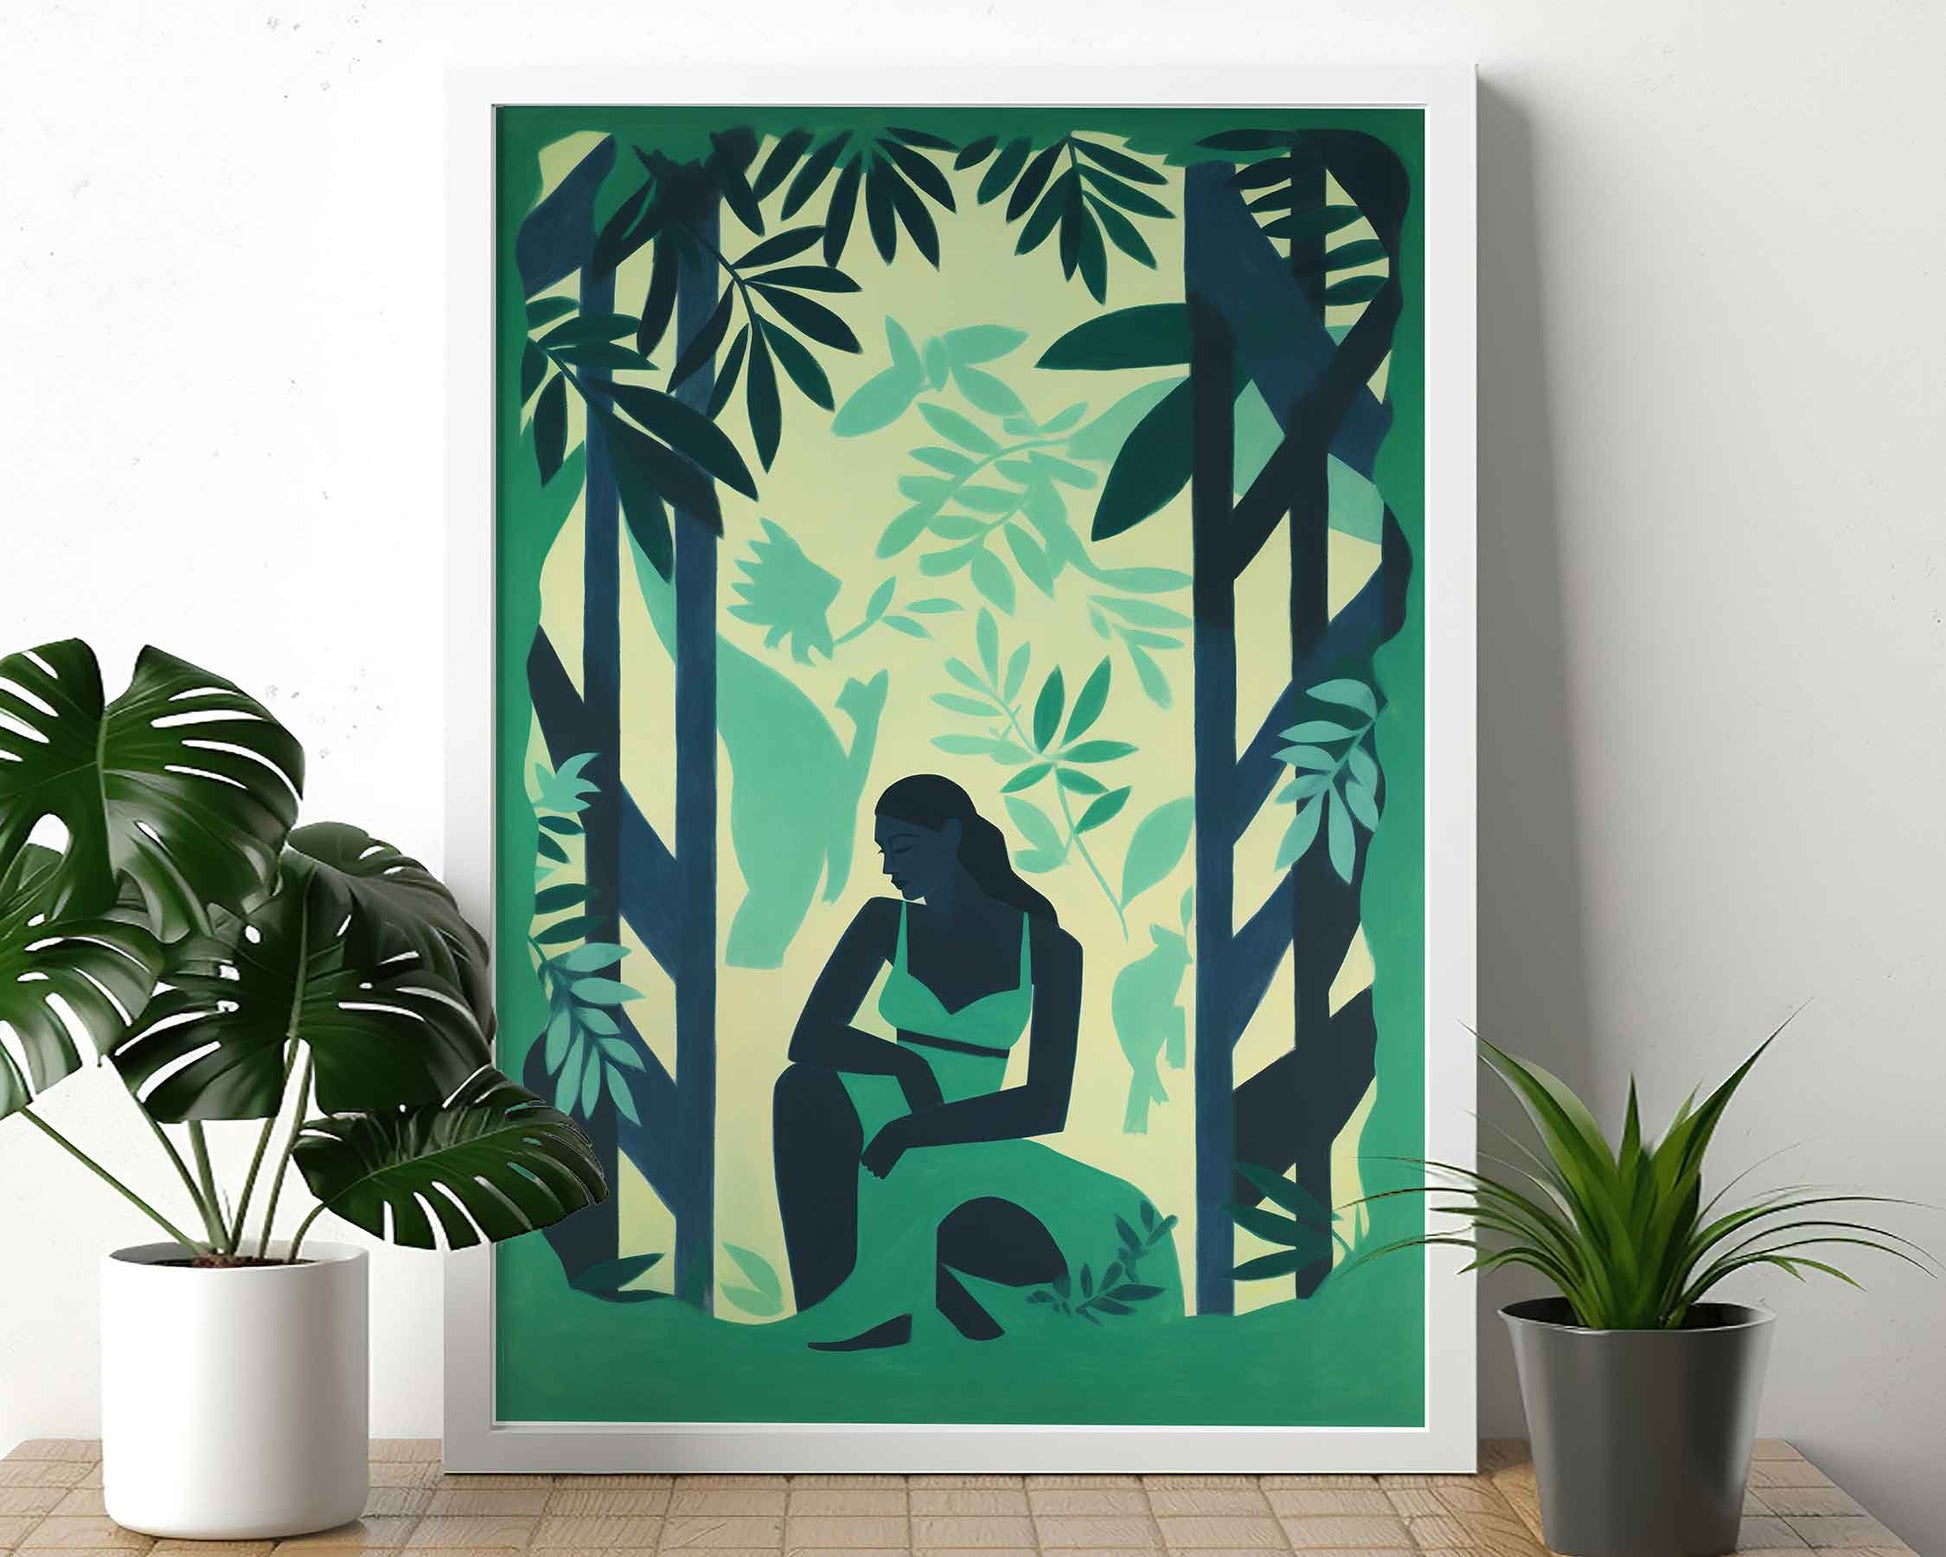 Framed Image of Matisse Style Art Wall Print Green Themed Poster Oil Paintings